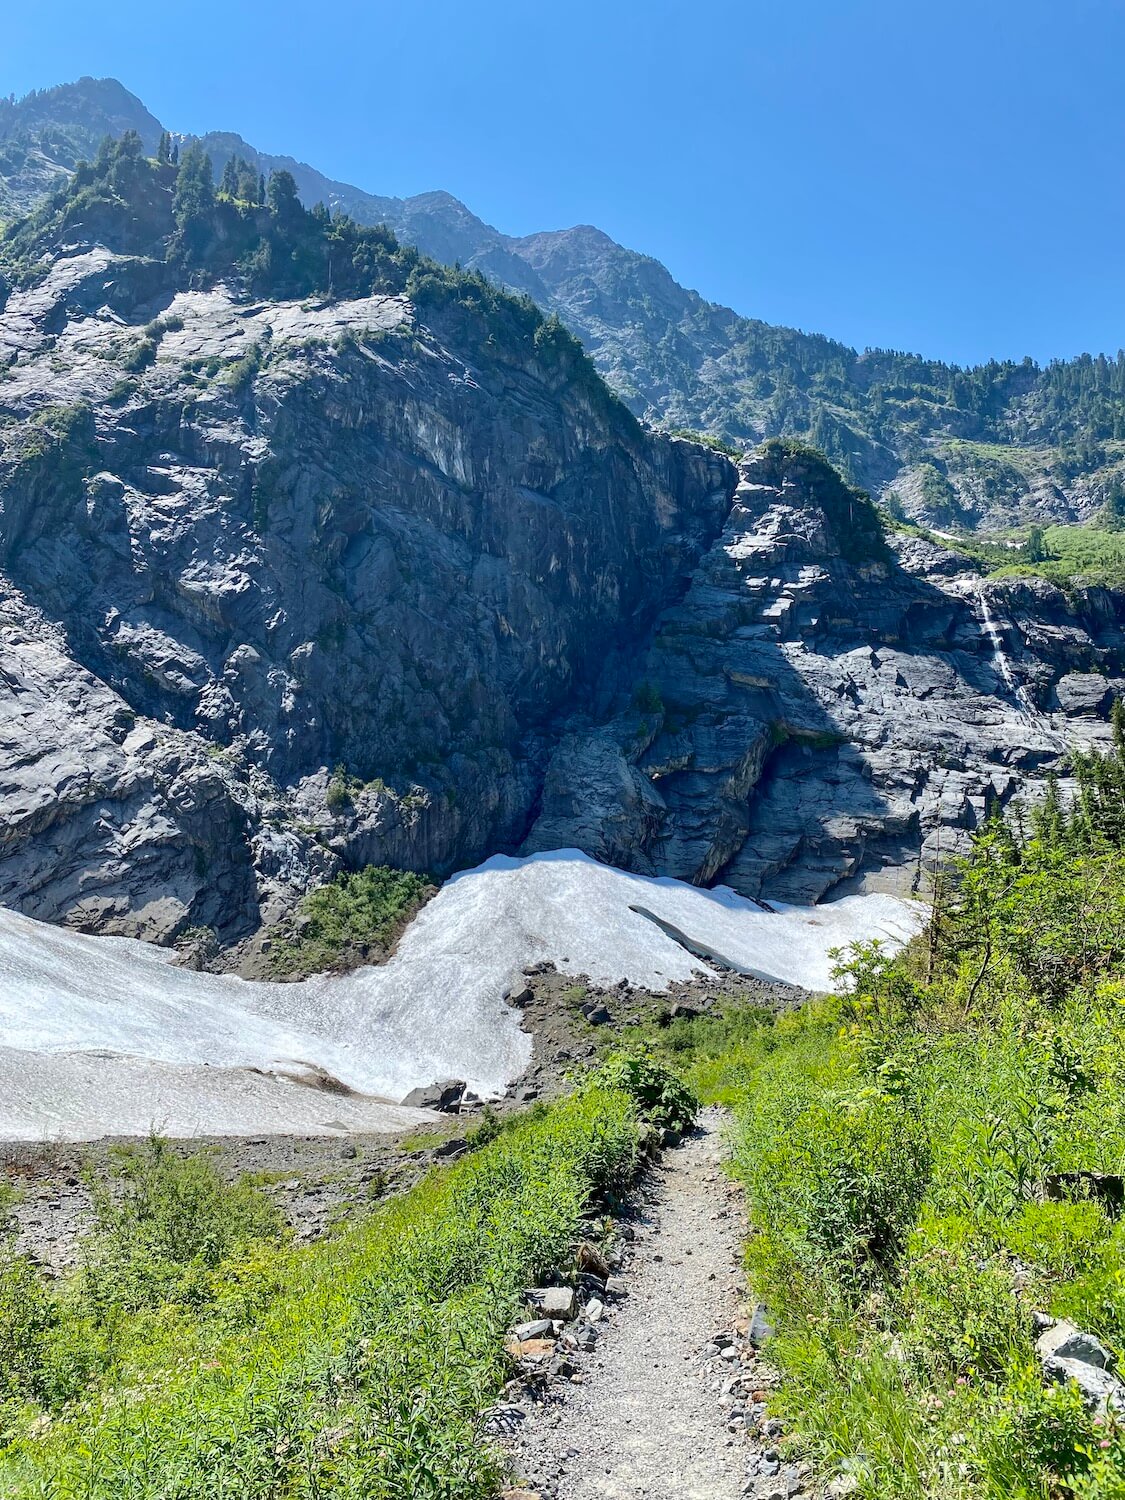 Big Four Mountain takes a commanding position in this photo of a gravel hiking trail leading toward a field of snow and ice at the base of the granite mountain.